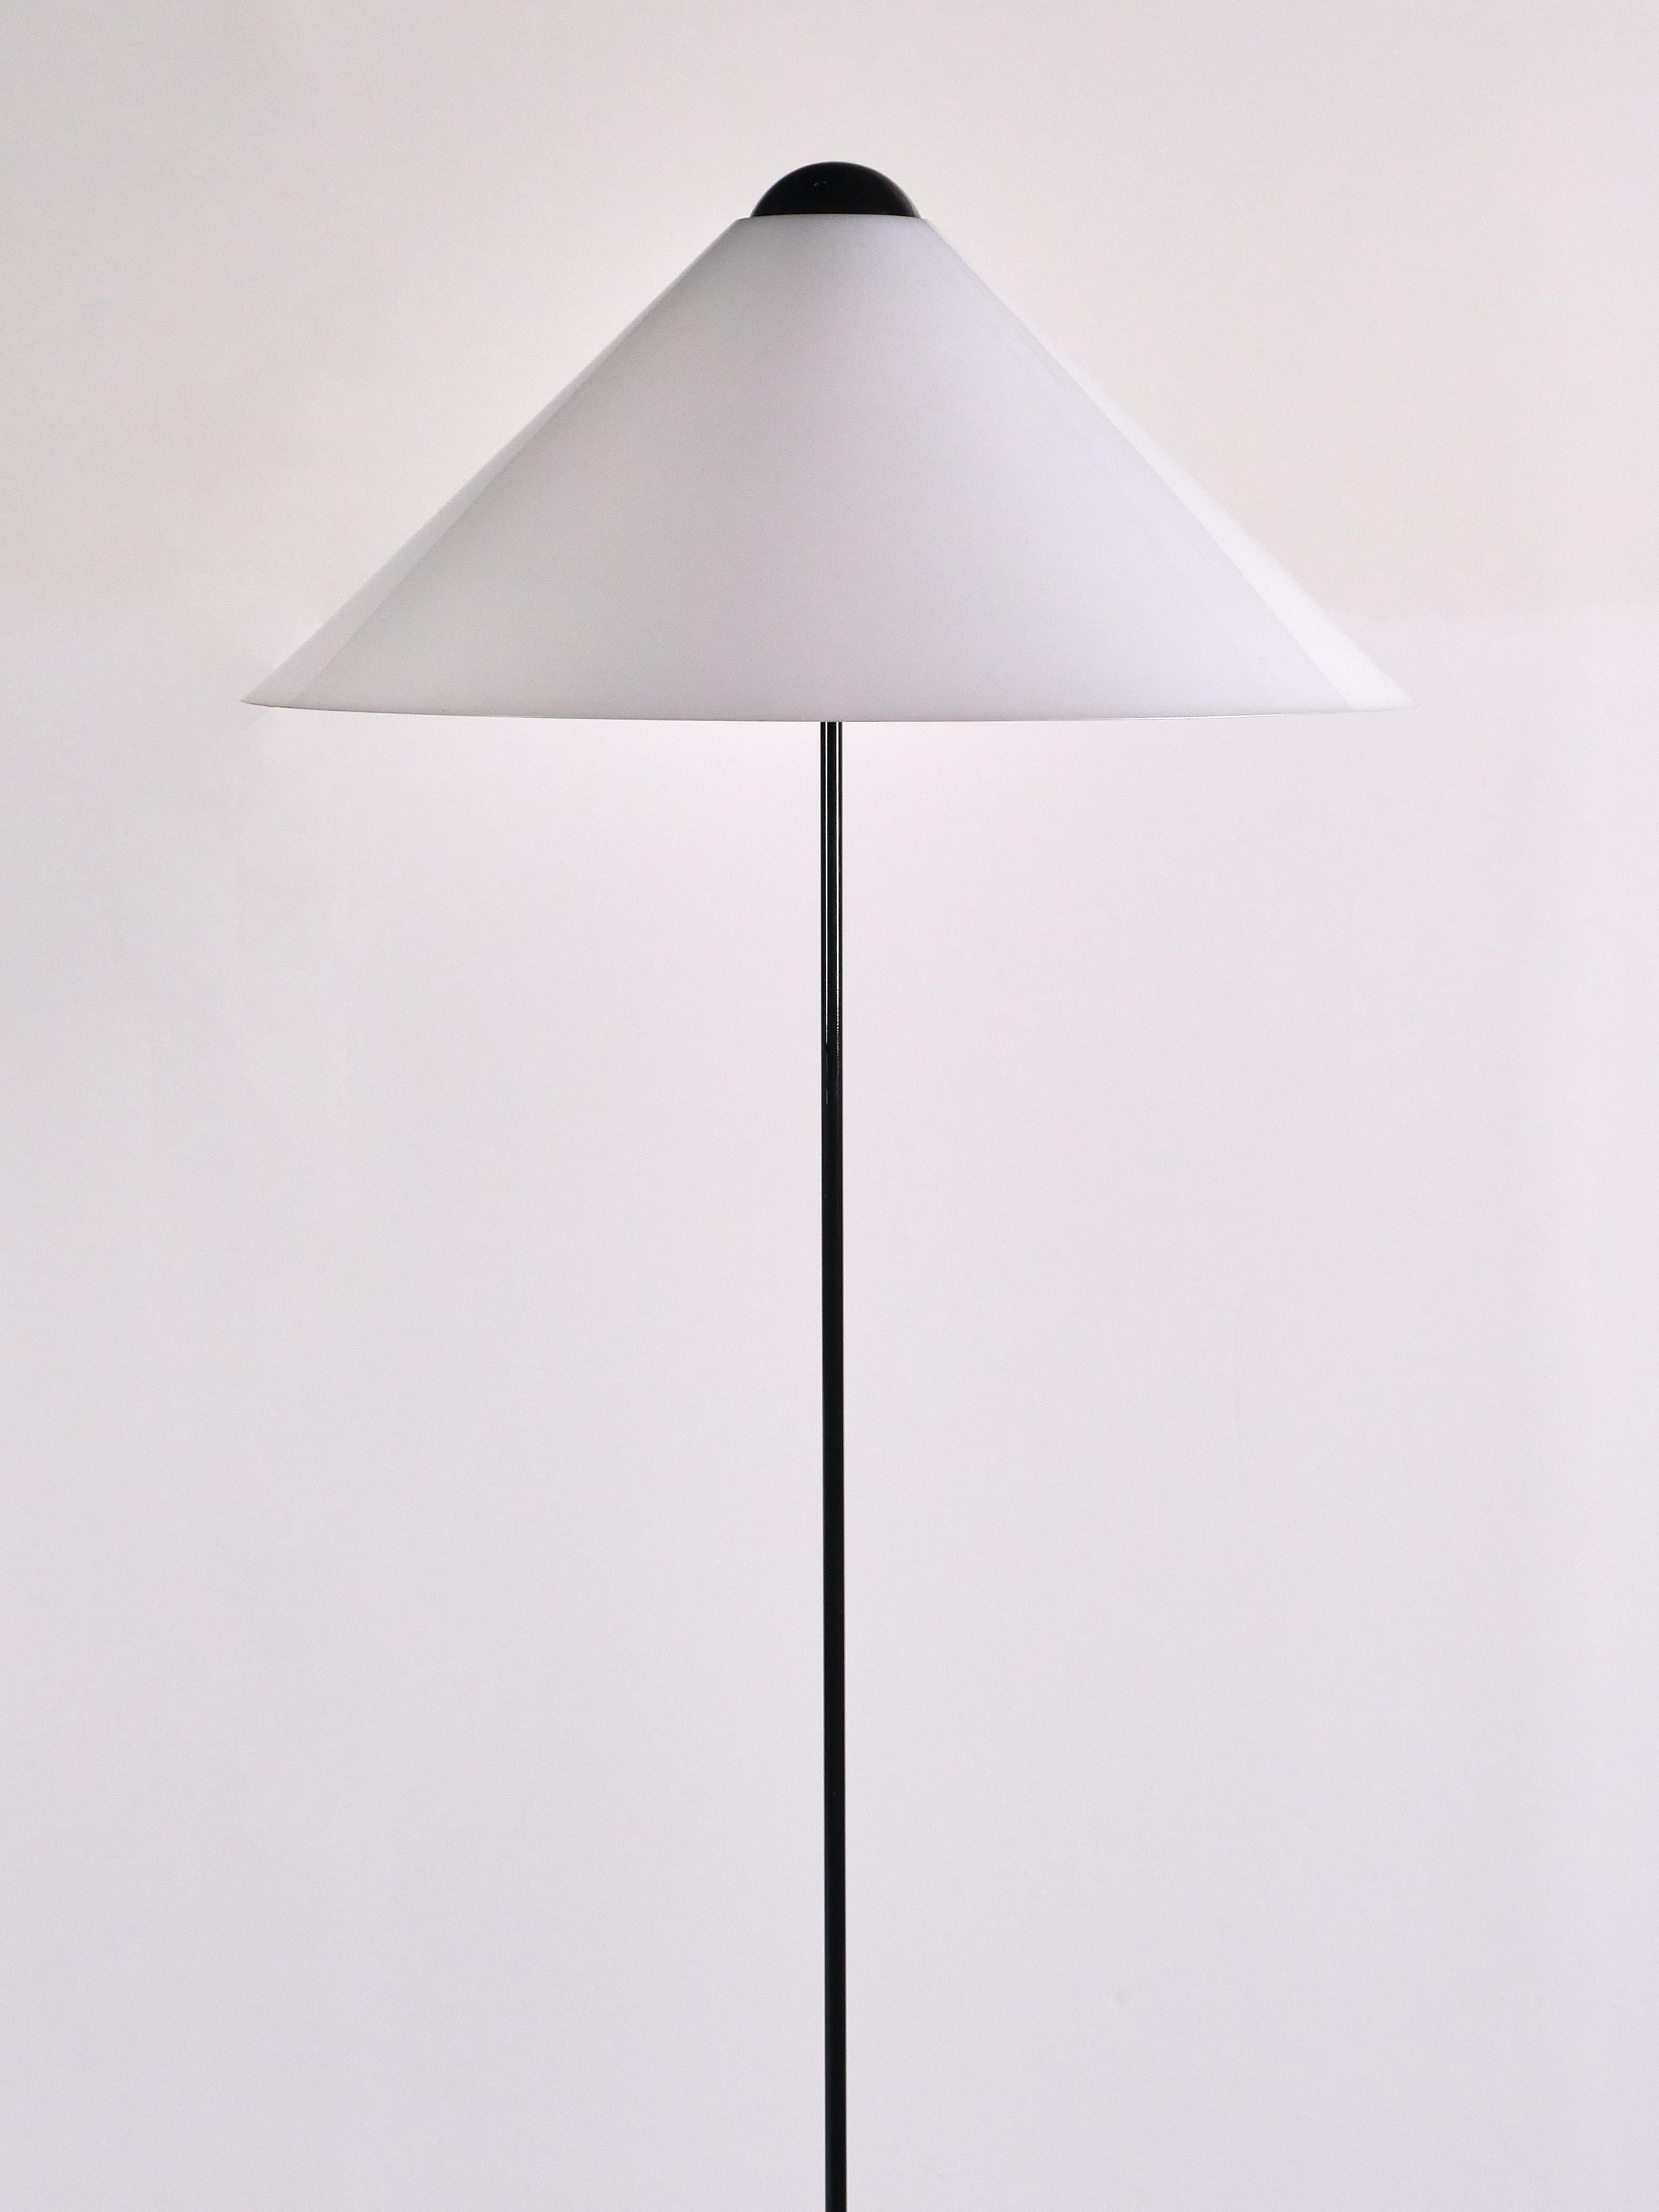 Mid-Century Modern Vico Magistretti 'Snow' Floor Lamp in Metal and Marble, Oluce, Italy, 1973 For Sale